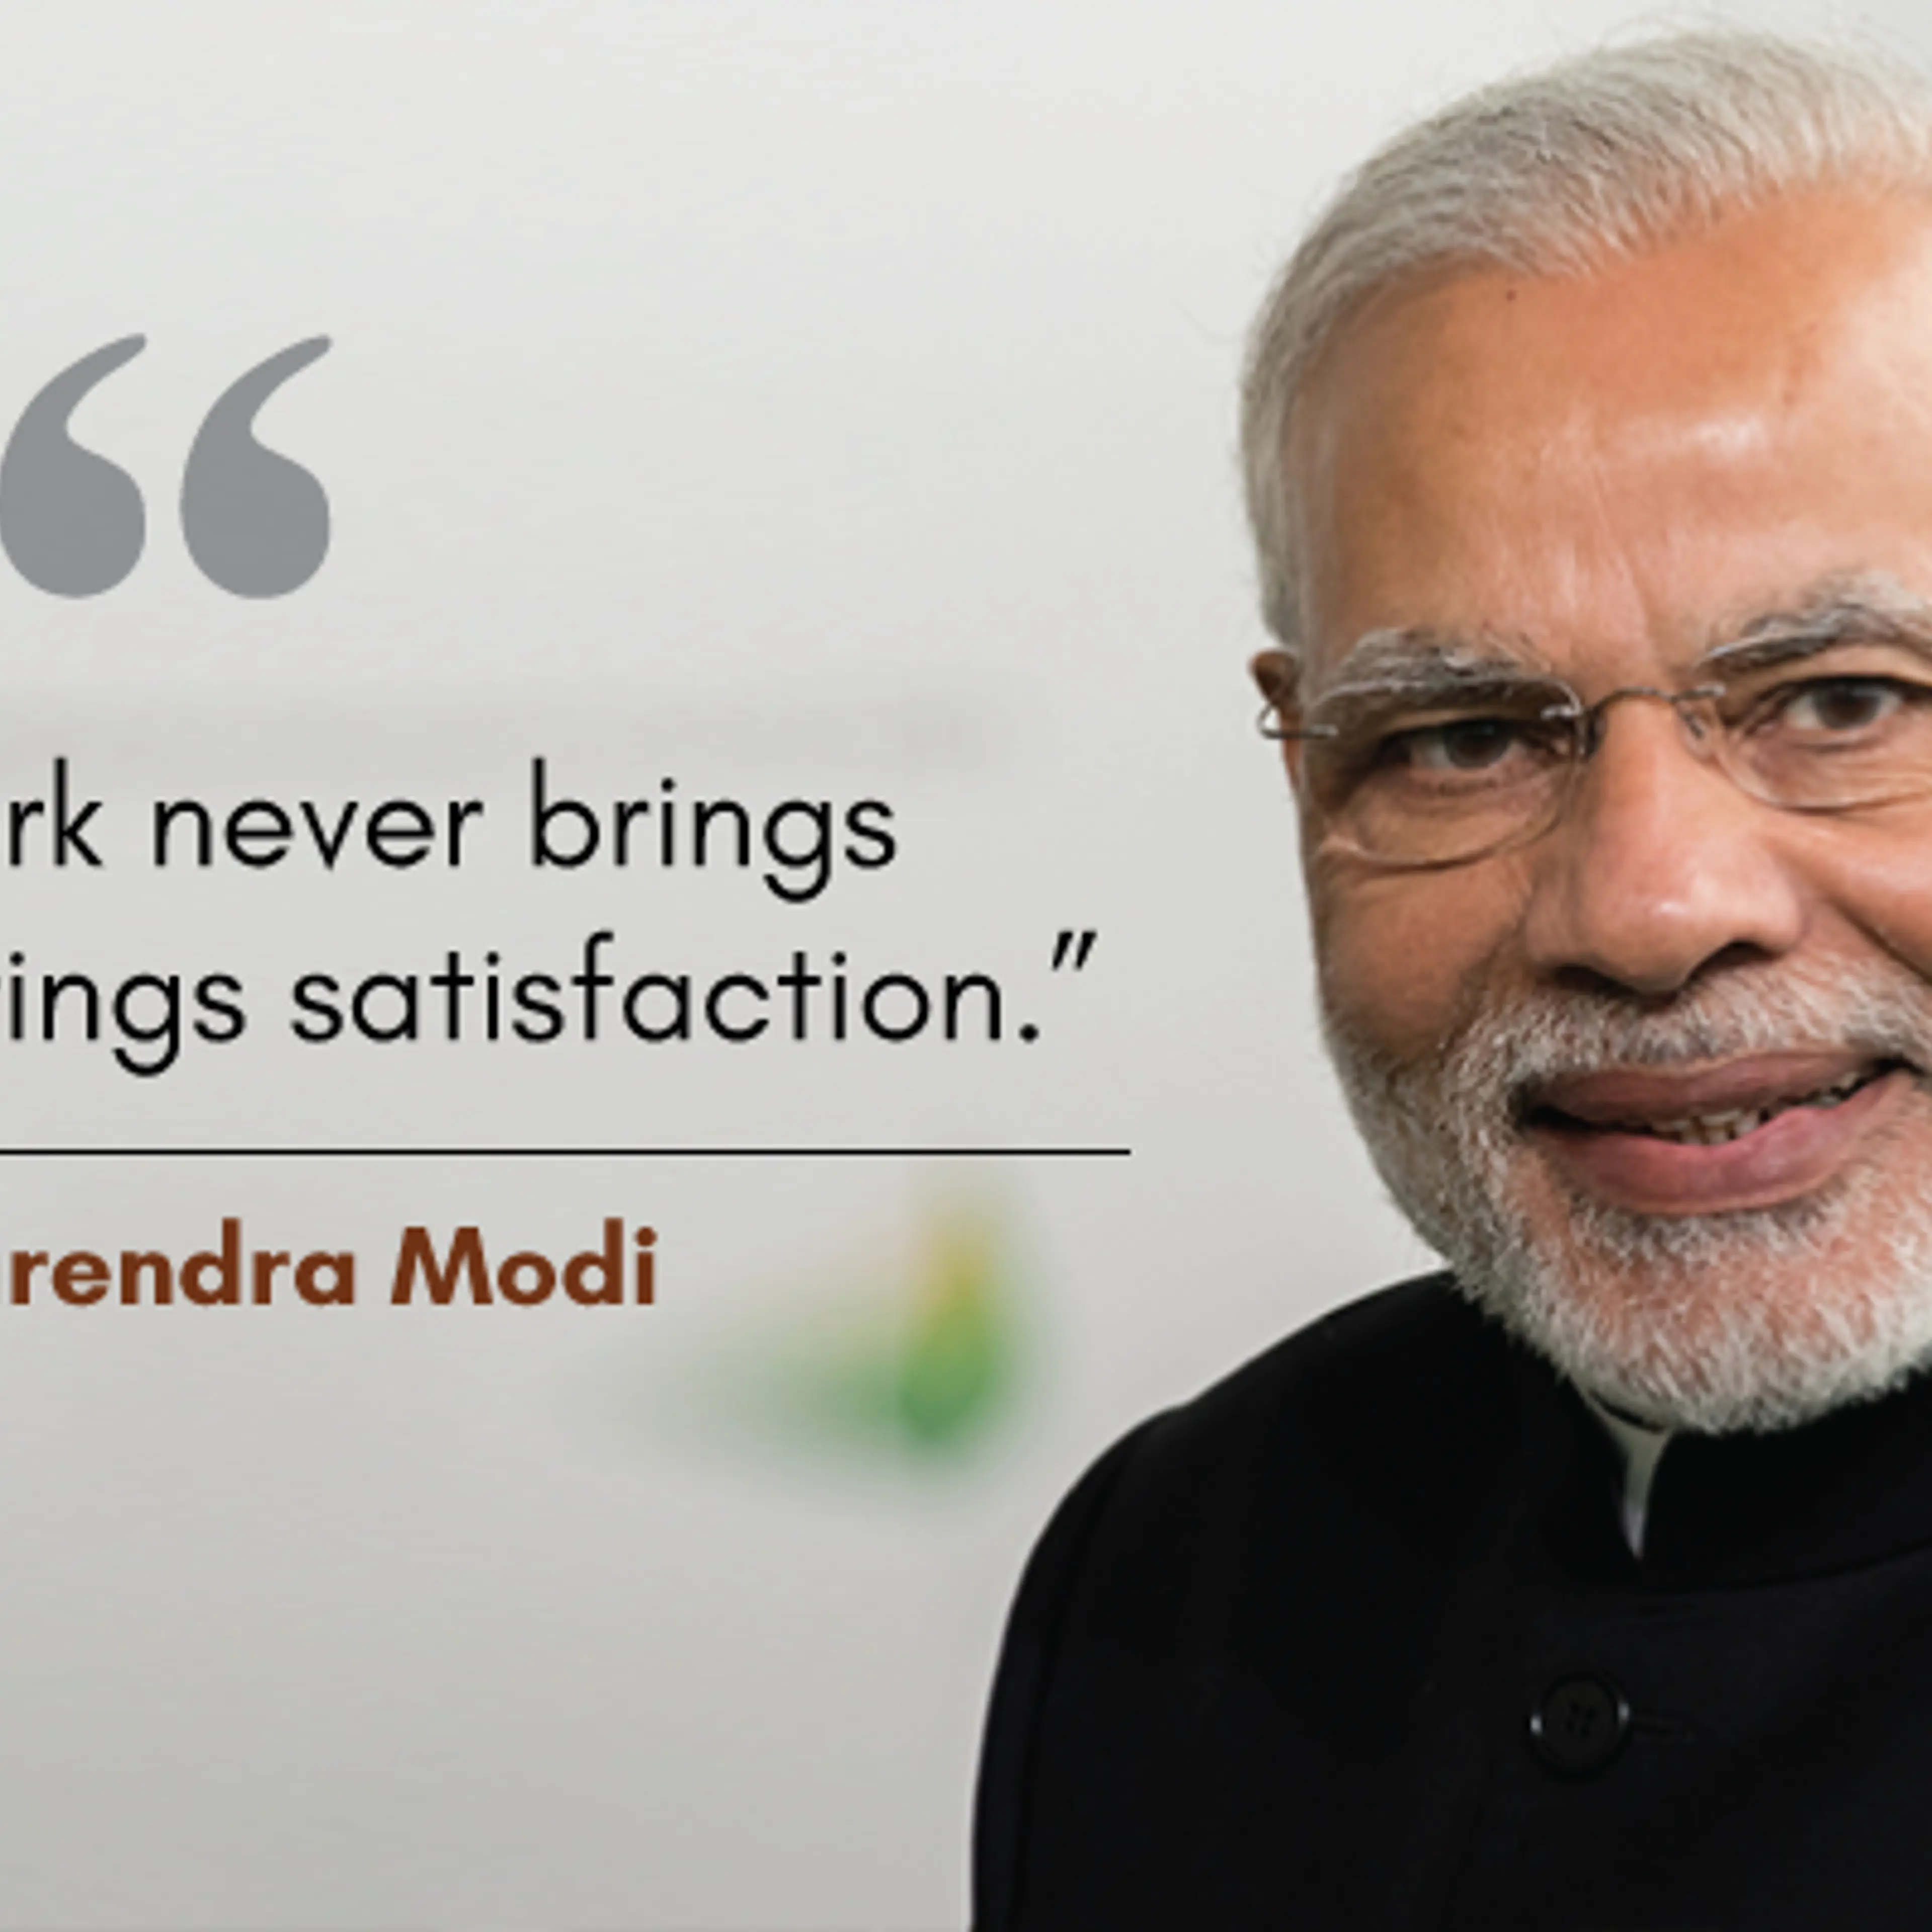 10 inspirational quotes from PM Narendra Modi to inspire the youth of India 